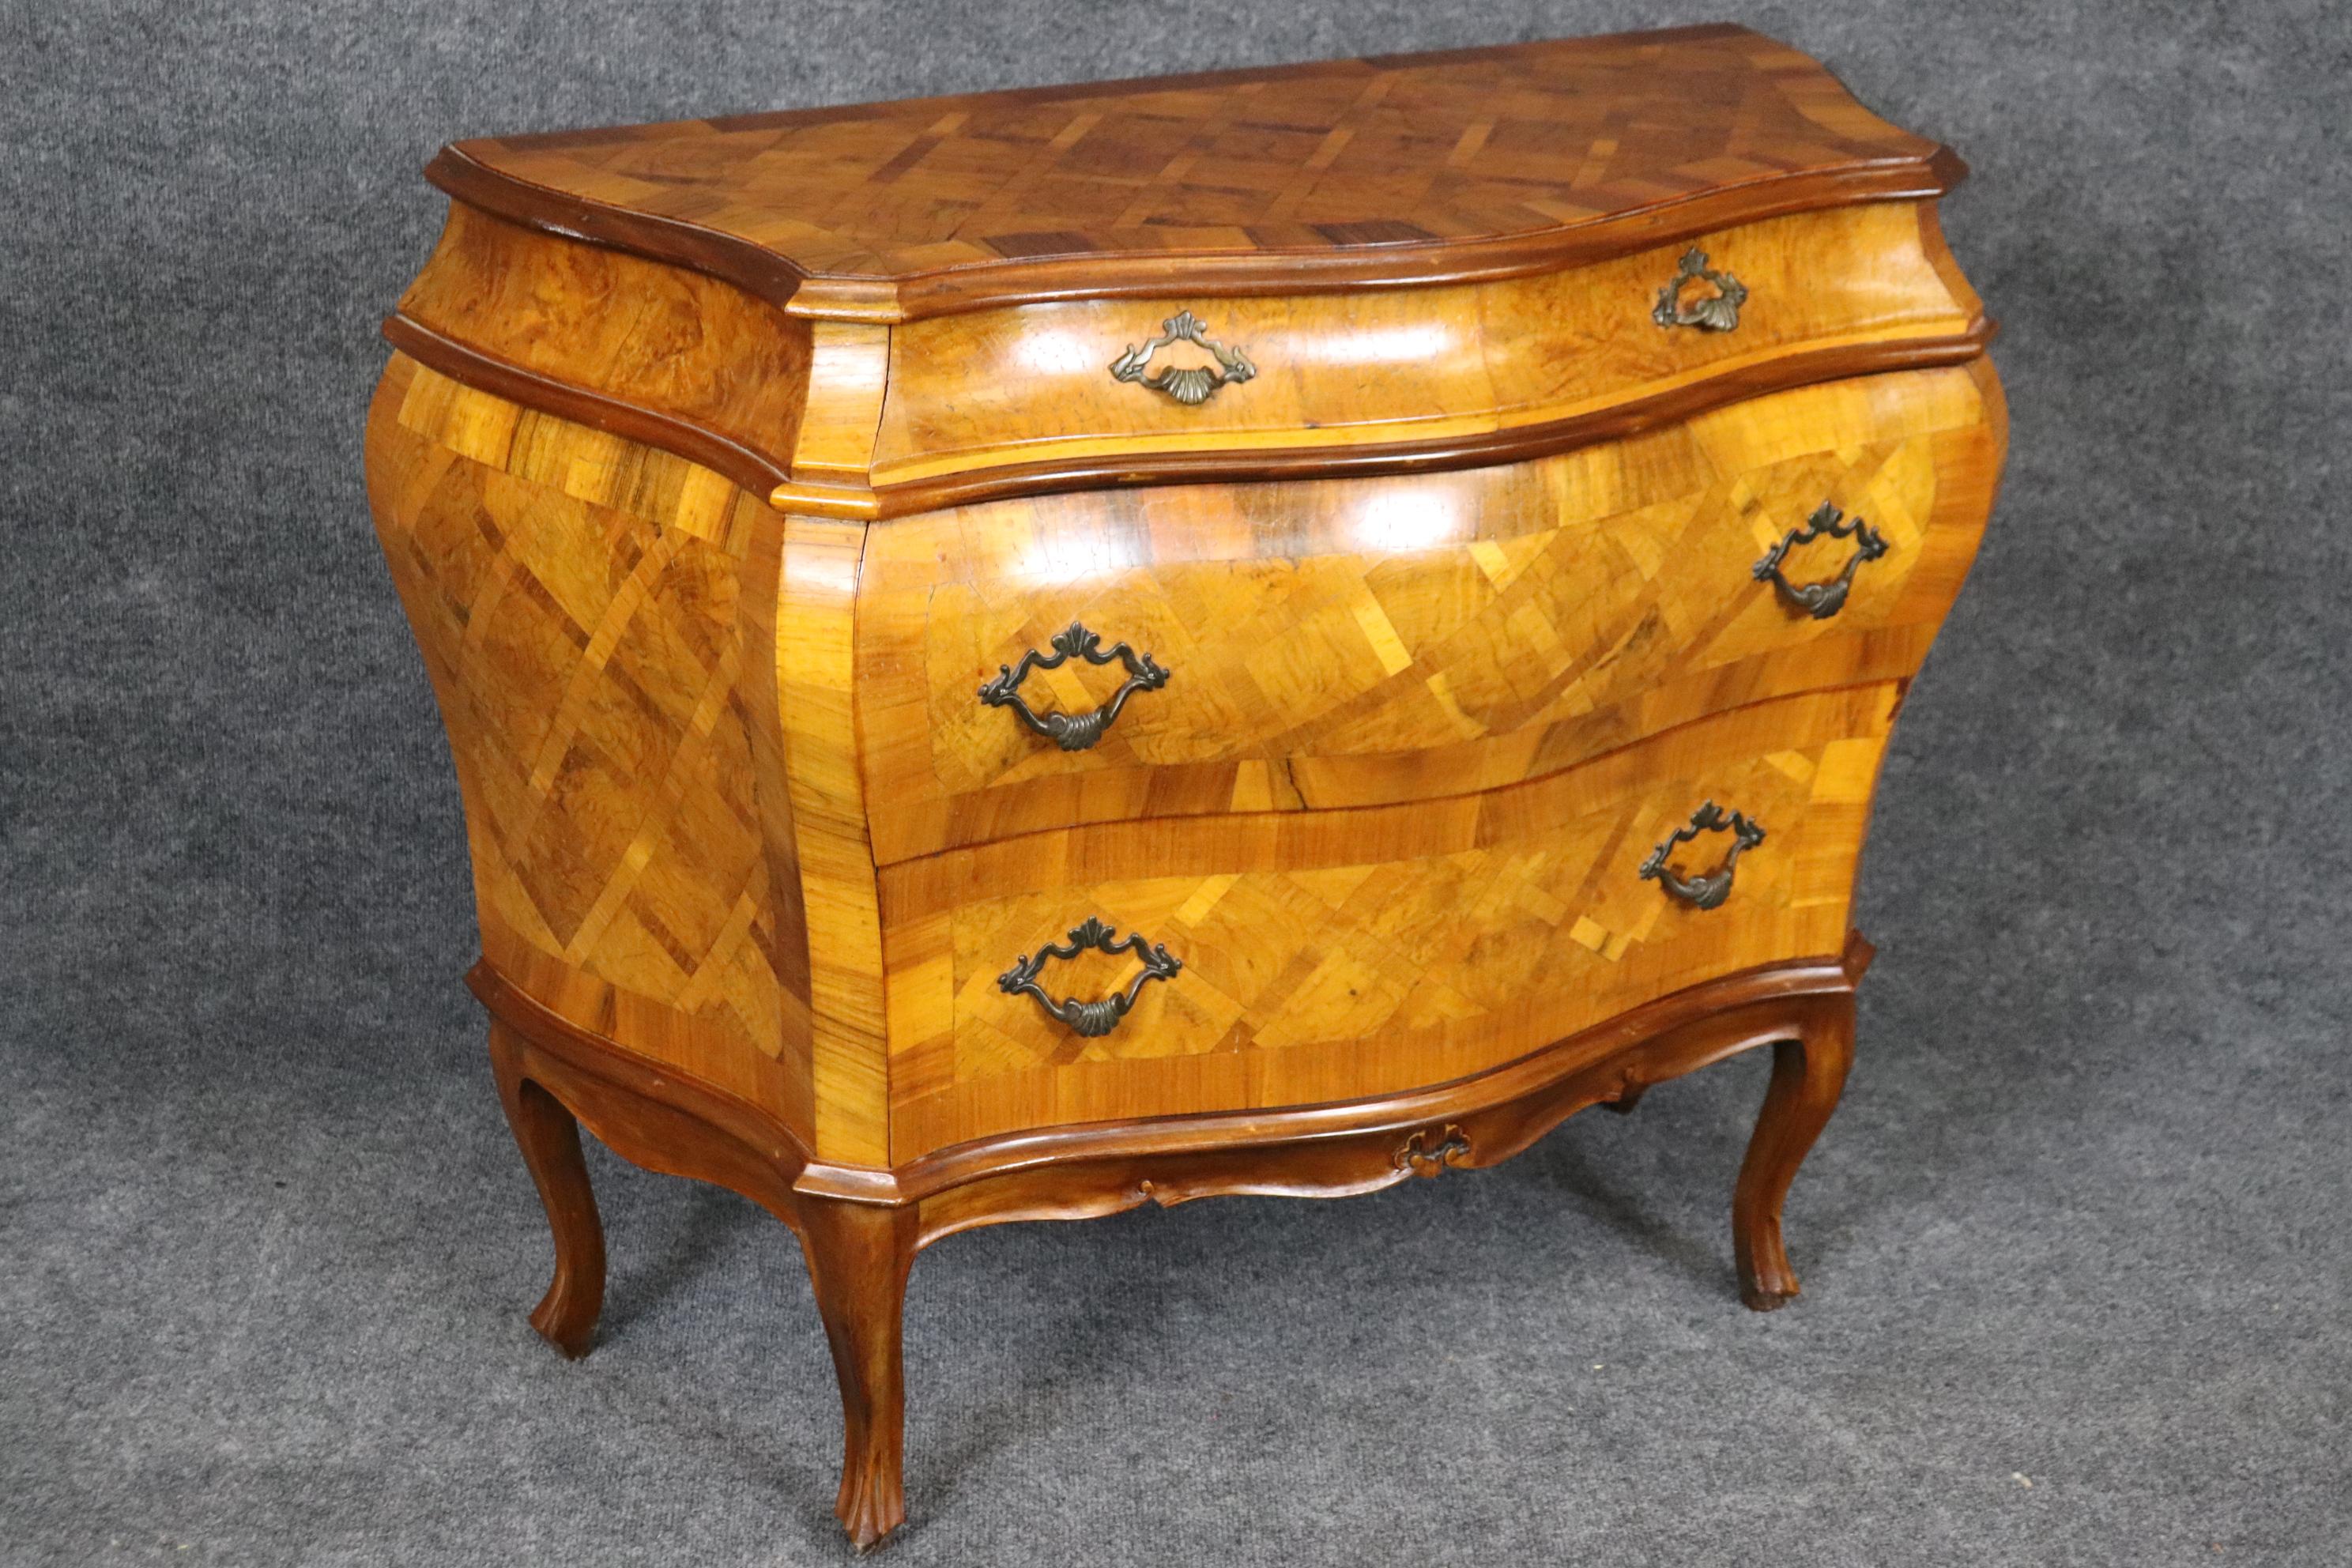 Mid-20th Century Italian Louis XV Style Inlaid Marquetry Olive Wood Commode Chest of Drawers For Sale